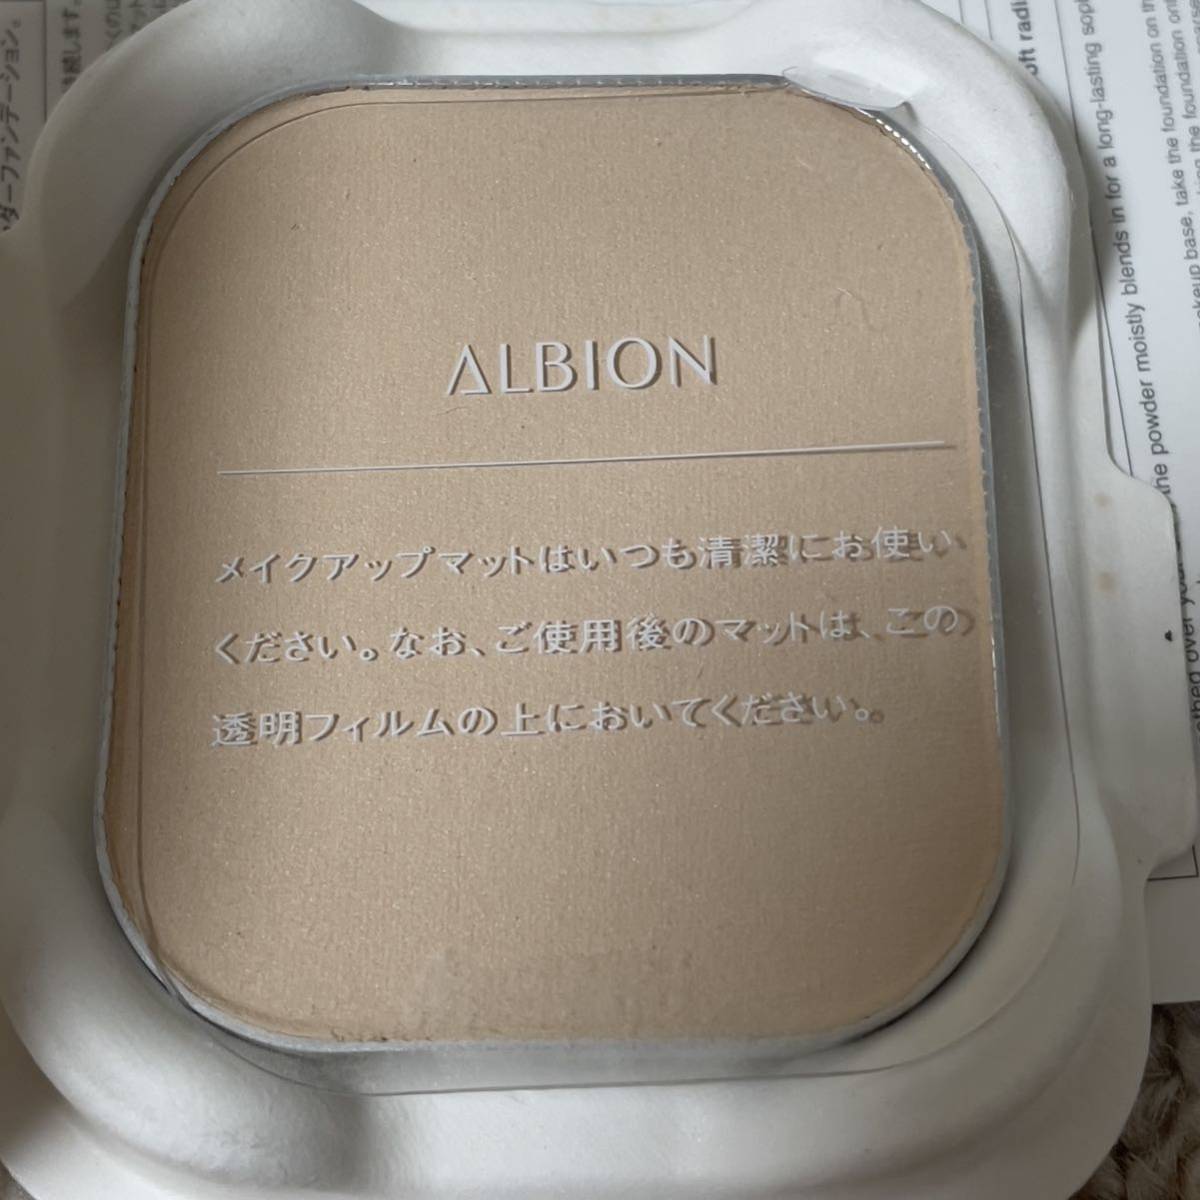  unused Albion pudding p powder rest pink beige 030 foundation packing change for 10g